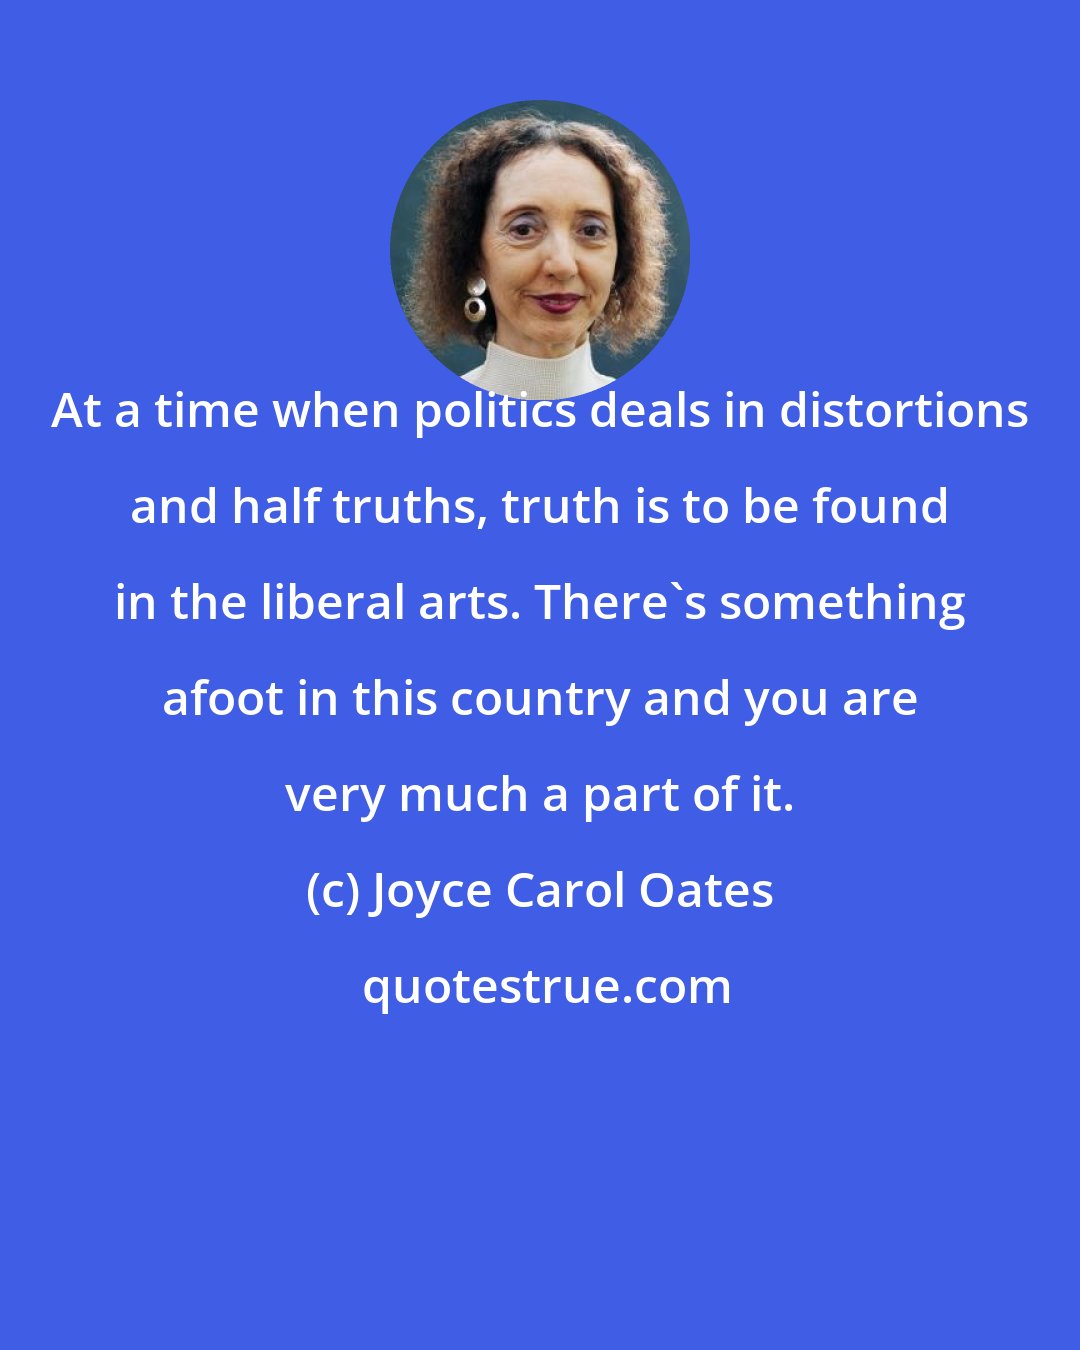 Joyce Carol Oates: At a time when politics deals in distortions and half truths, truth is to be found in the liberal arts. There's something afoot in this country and you are very much a part of it.